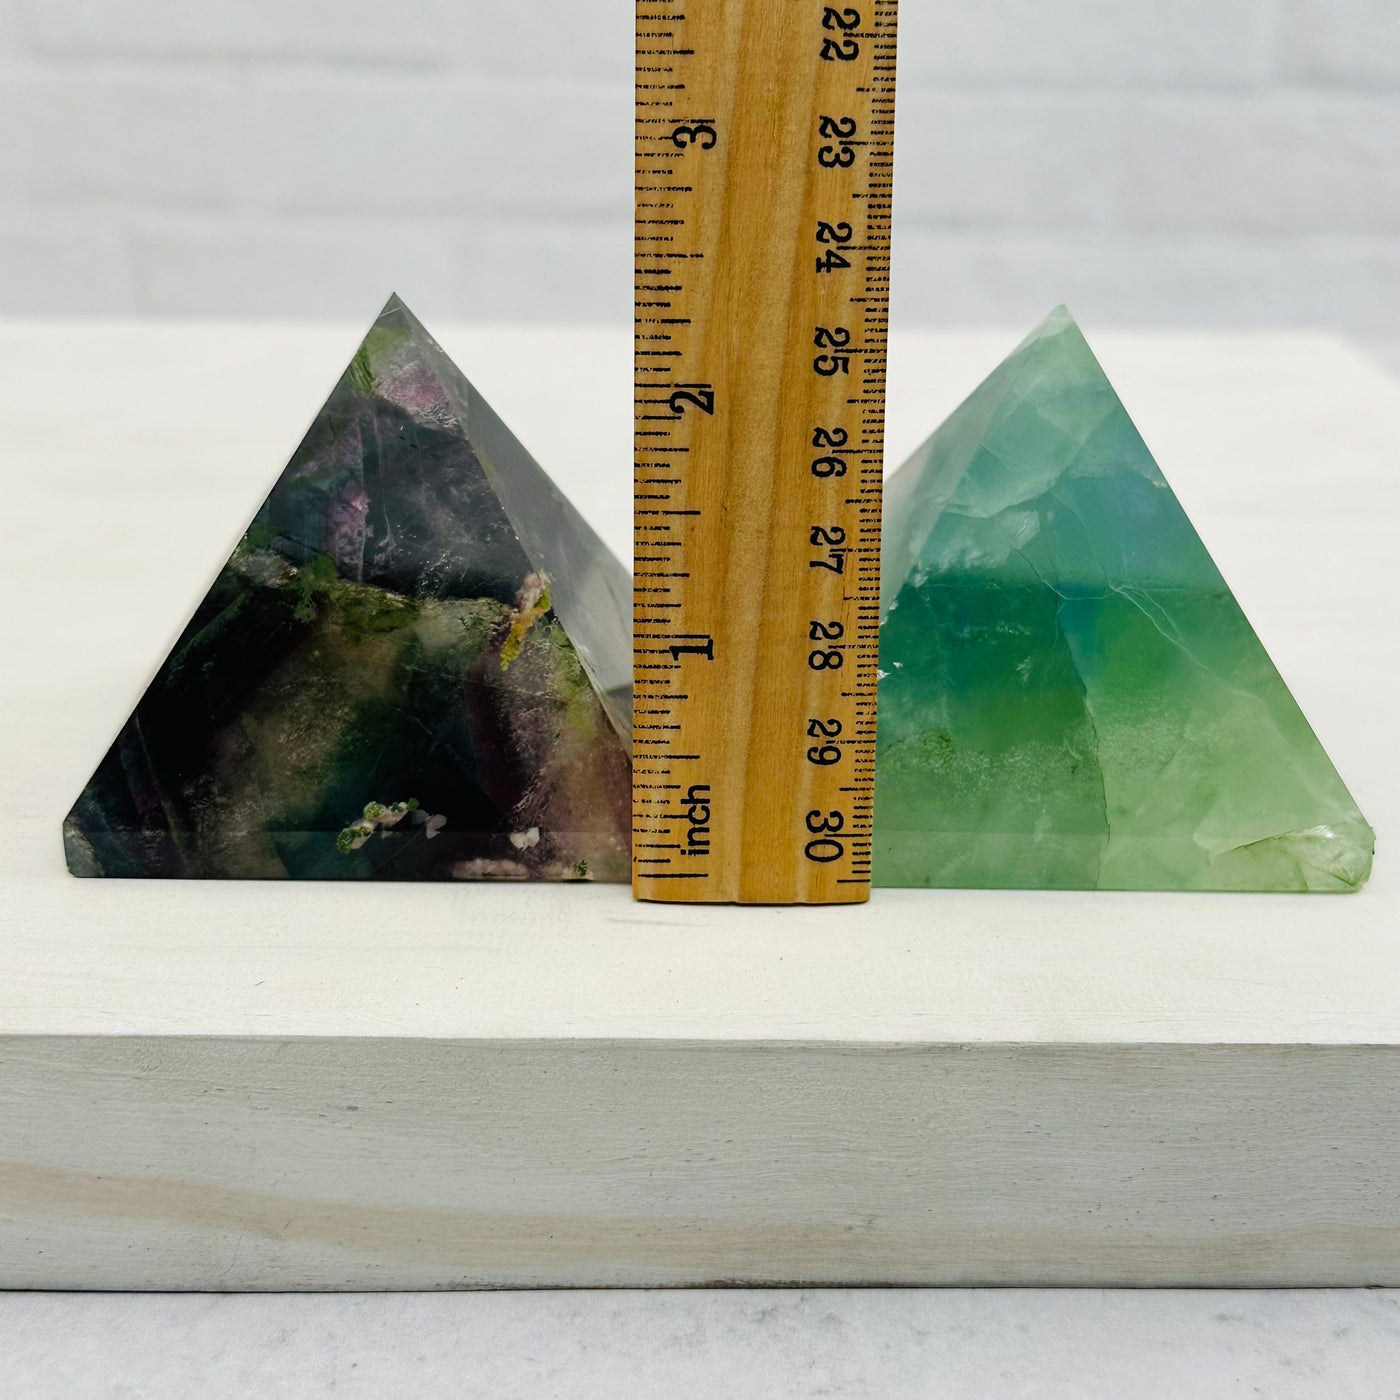 pyramids next to a ruler for size reference